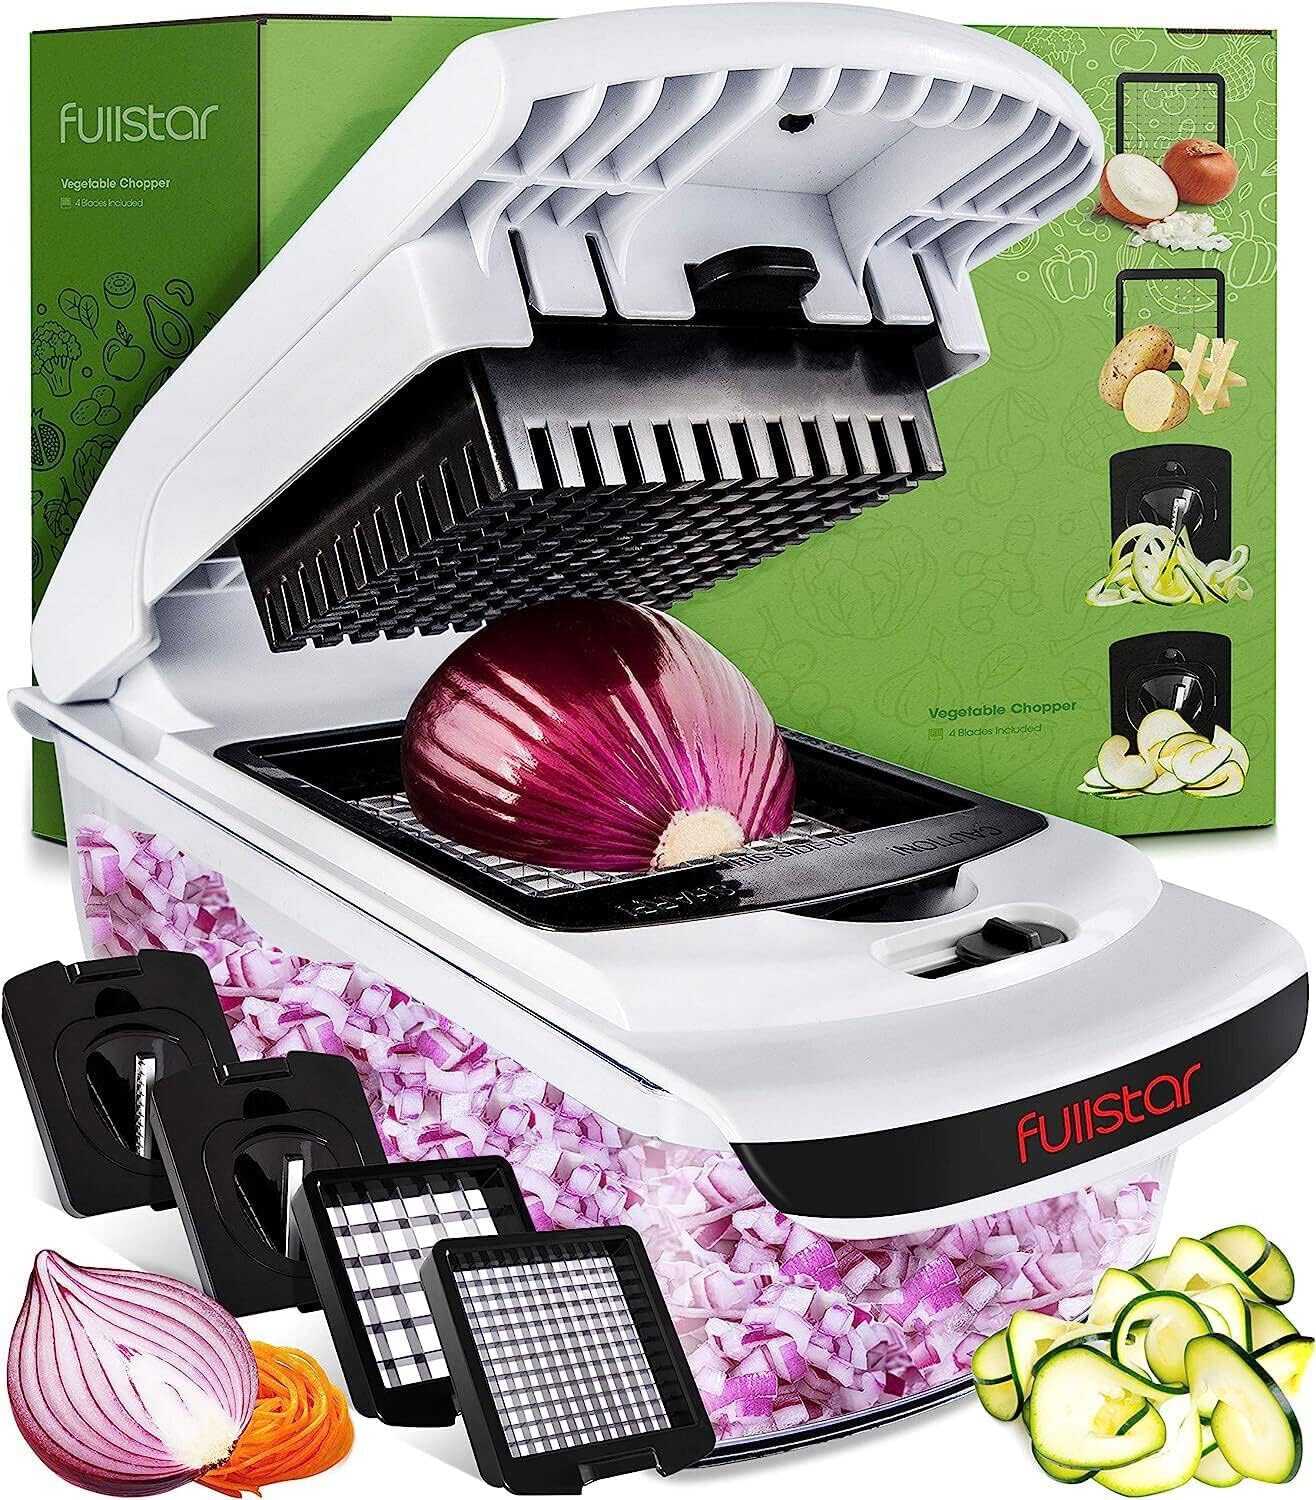 Limited-Time Promo: Fullstar Vegetable Chopper - Spiralizer Vegetable Slicer - Onion Chopper with Container - Pro Food Chopper - Slicer Dicer Cutter - (4 in 1, White)